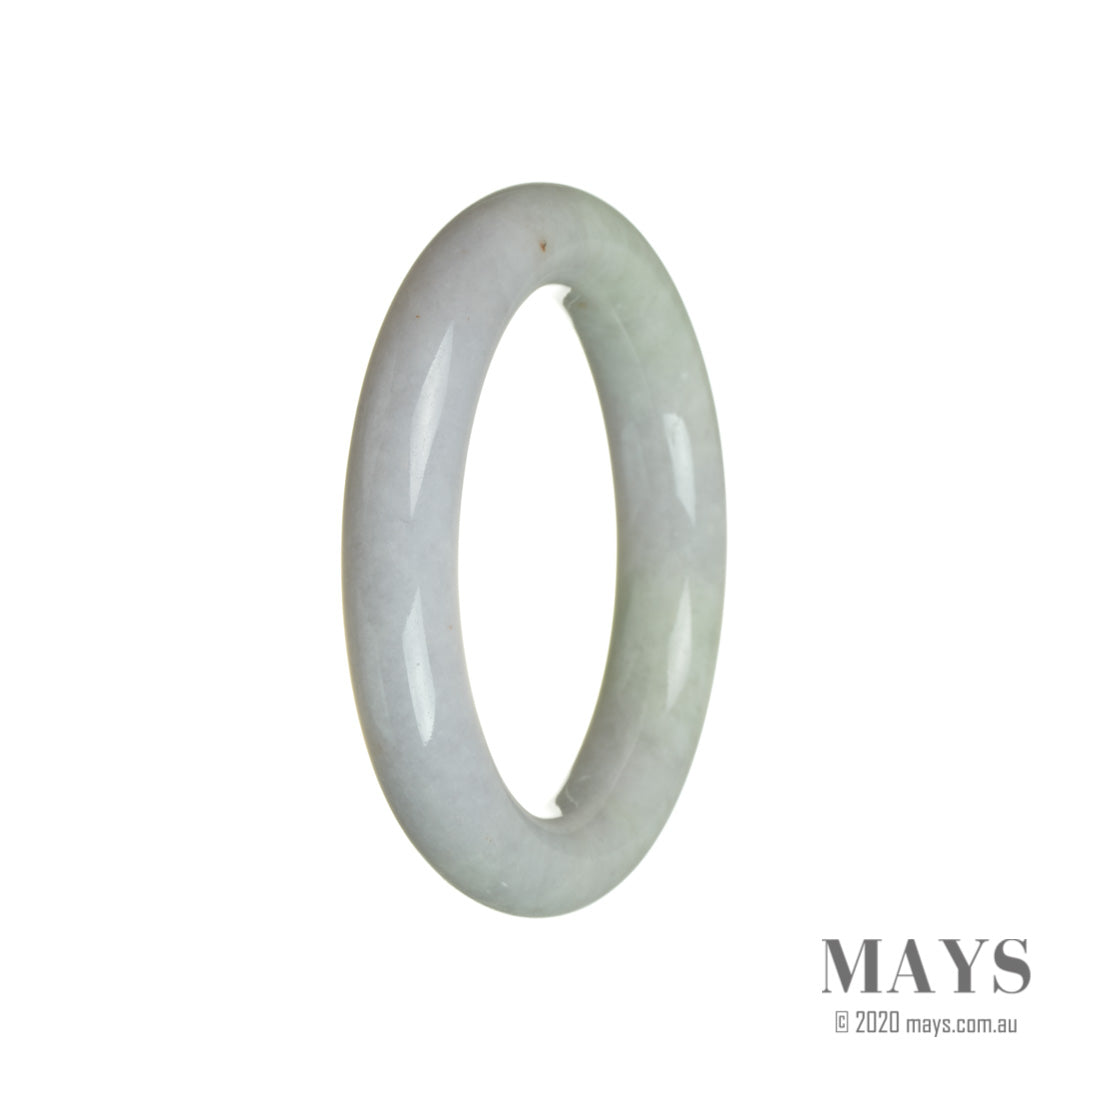 An image of a round traditional jade bracelet with lavender and green colors.